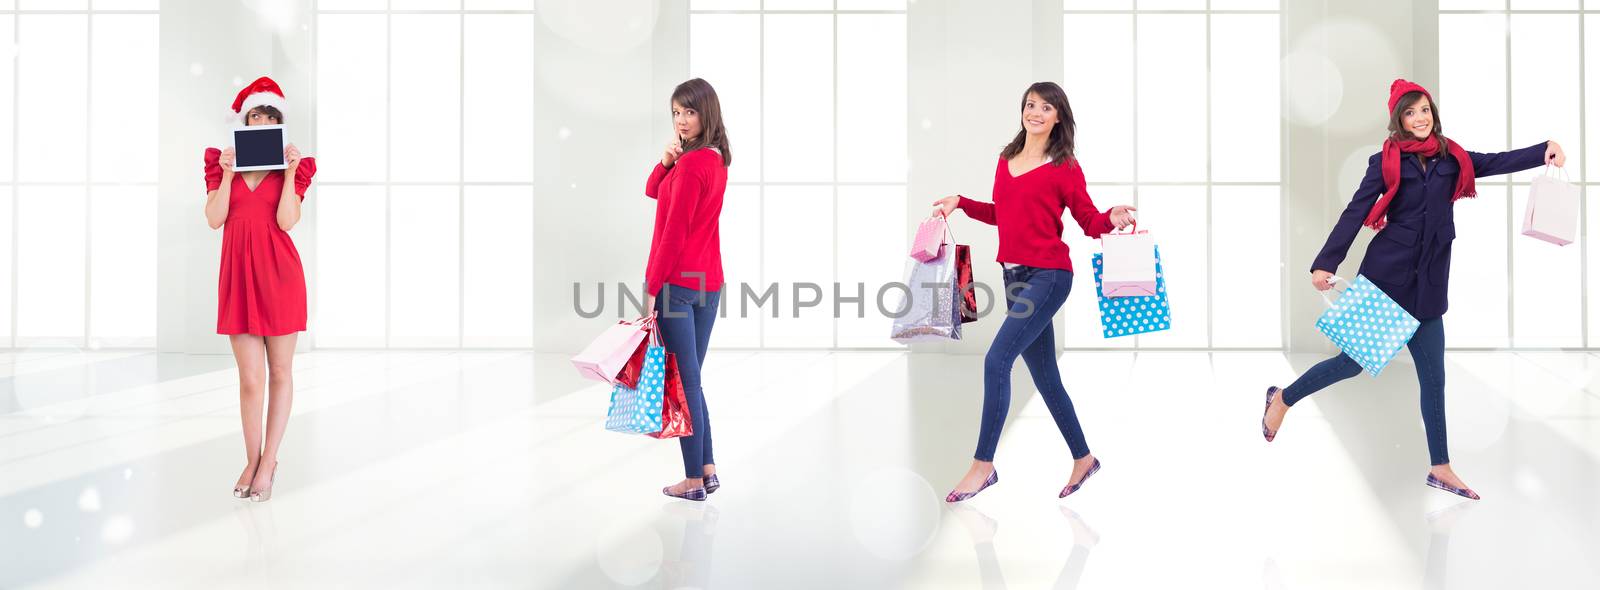 Festive brunette holding gift bags against twinkling lights over room with windows